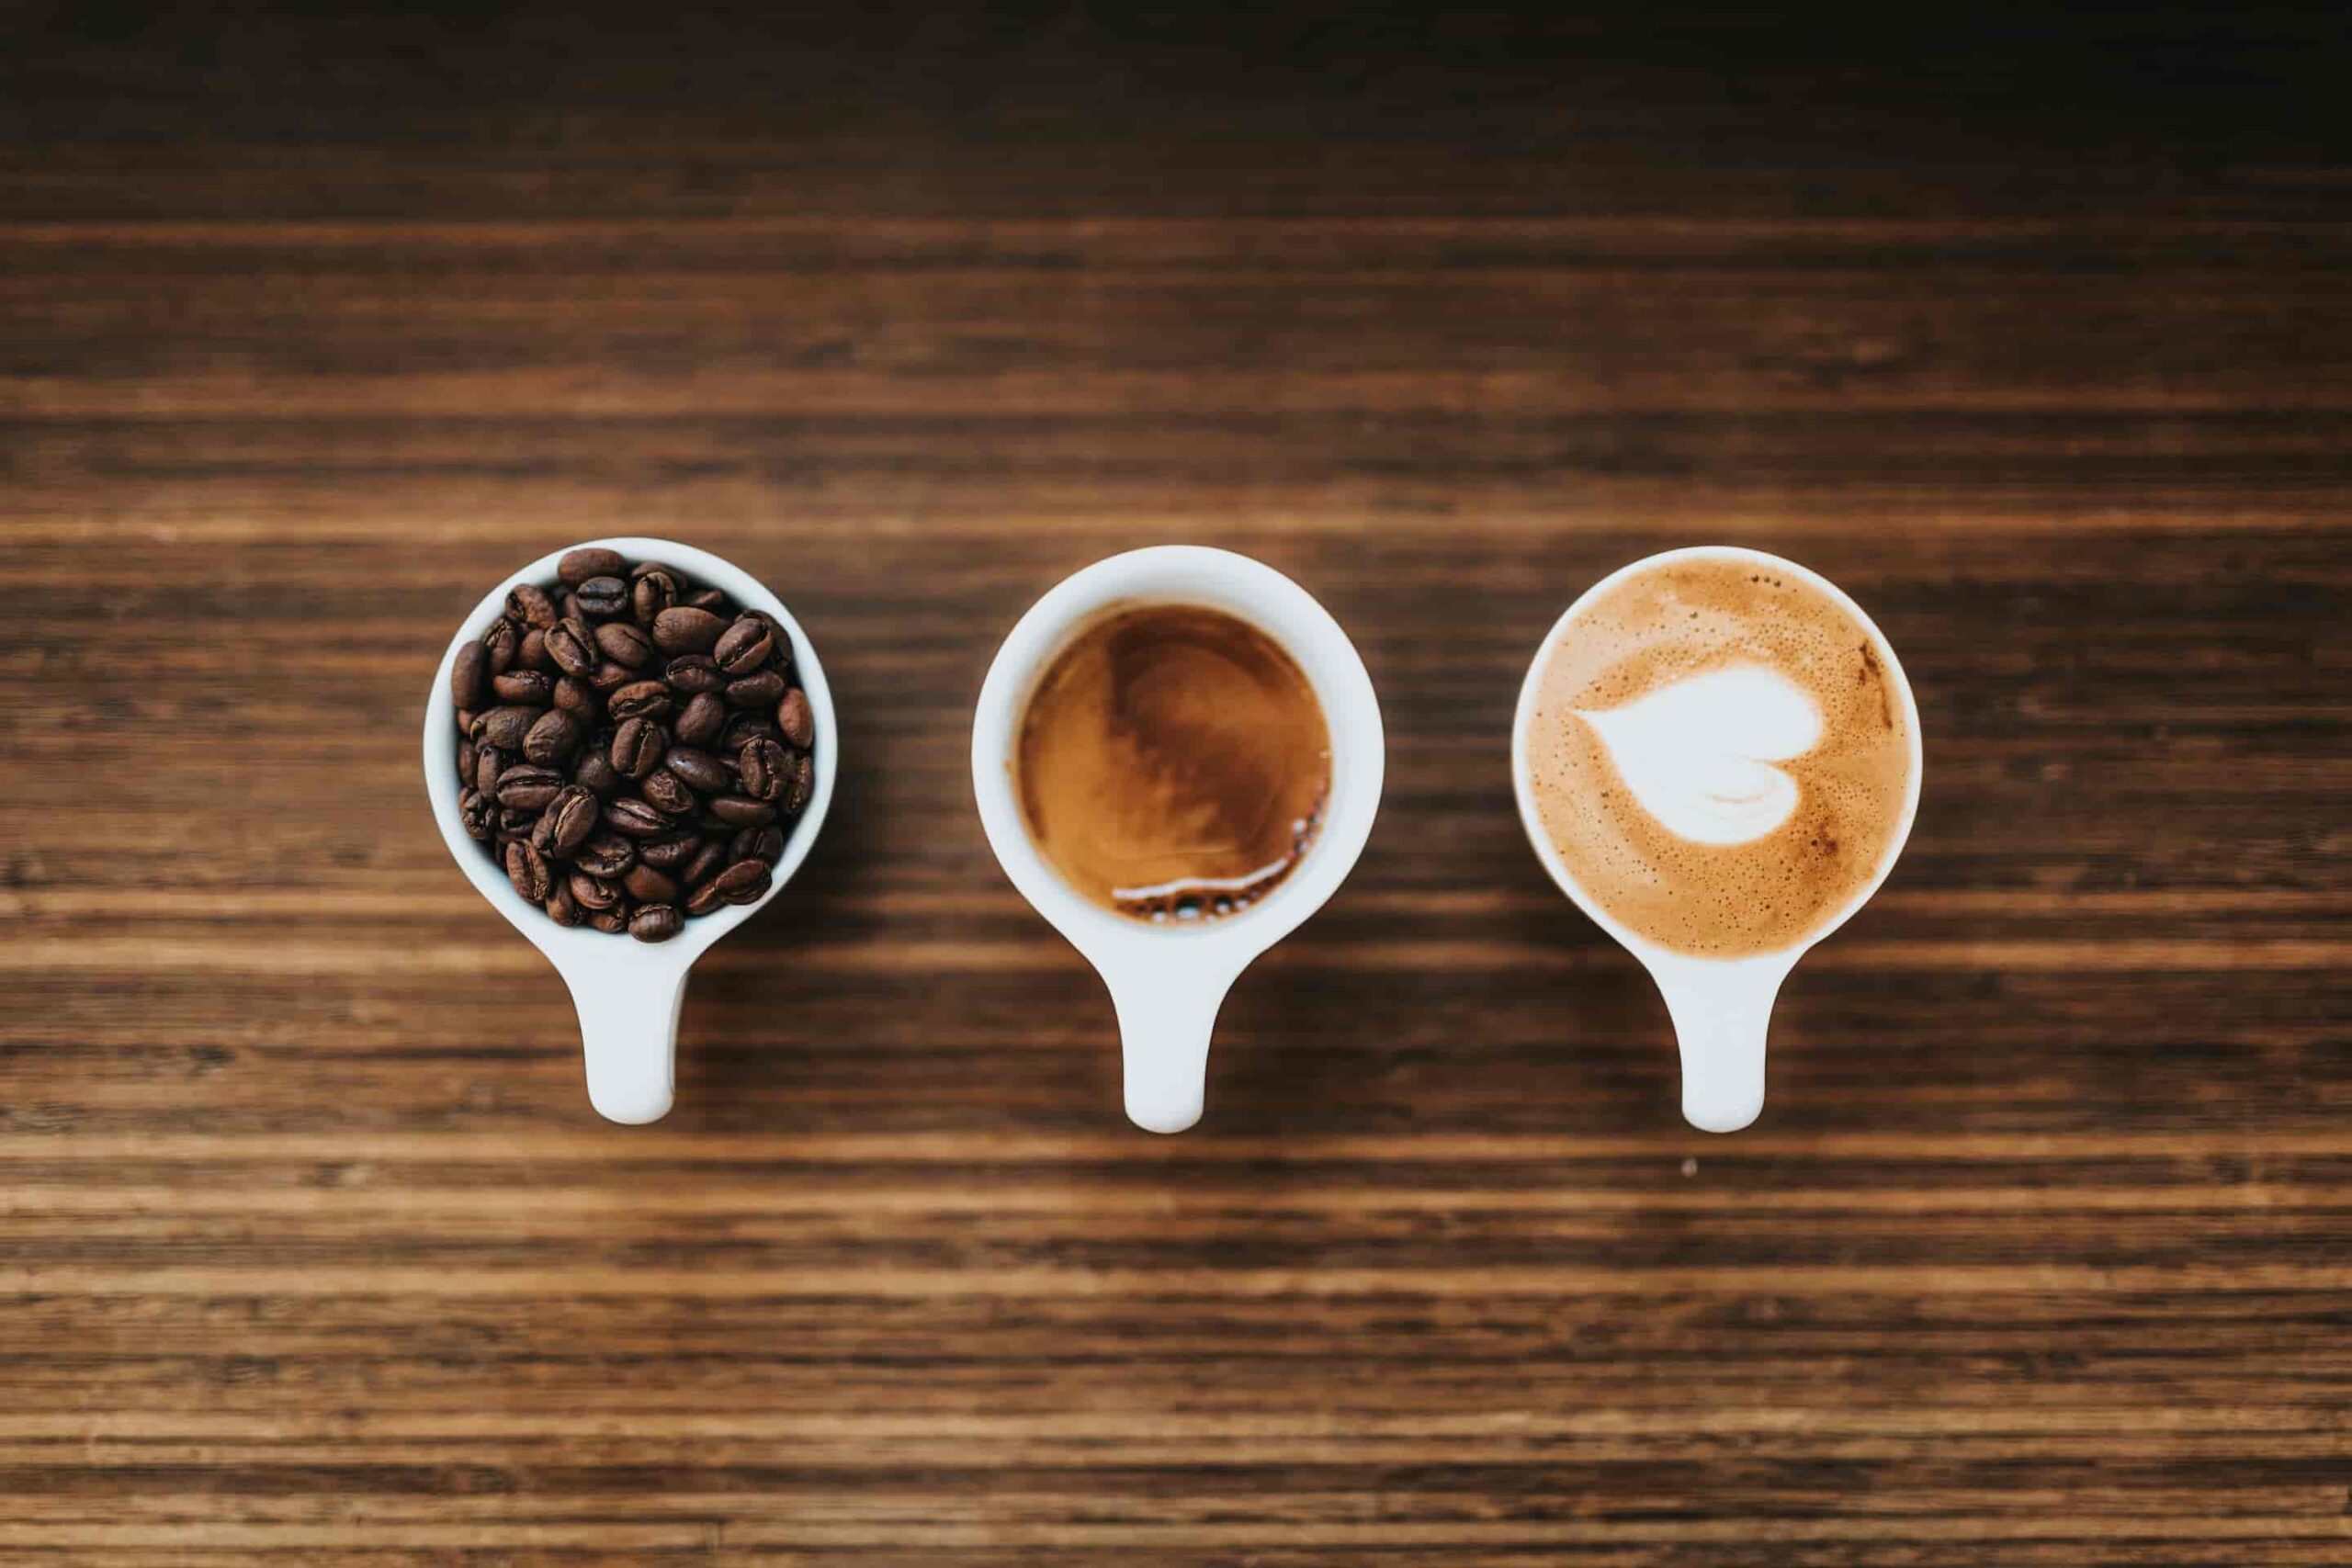 What Is A Coffee Flight? Here's What You Need To Know